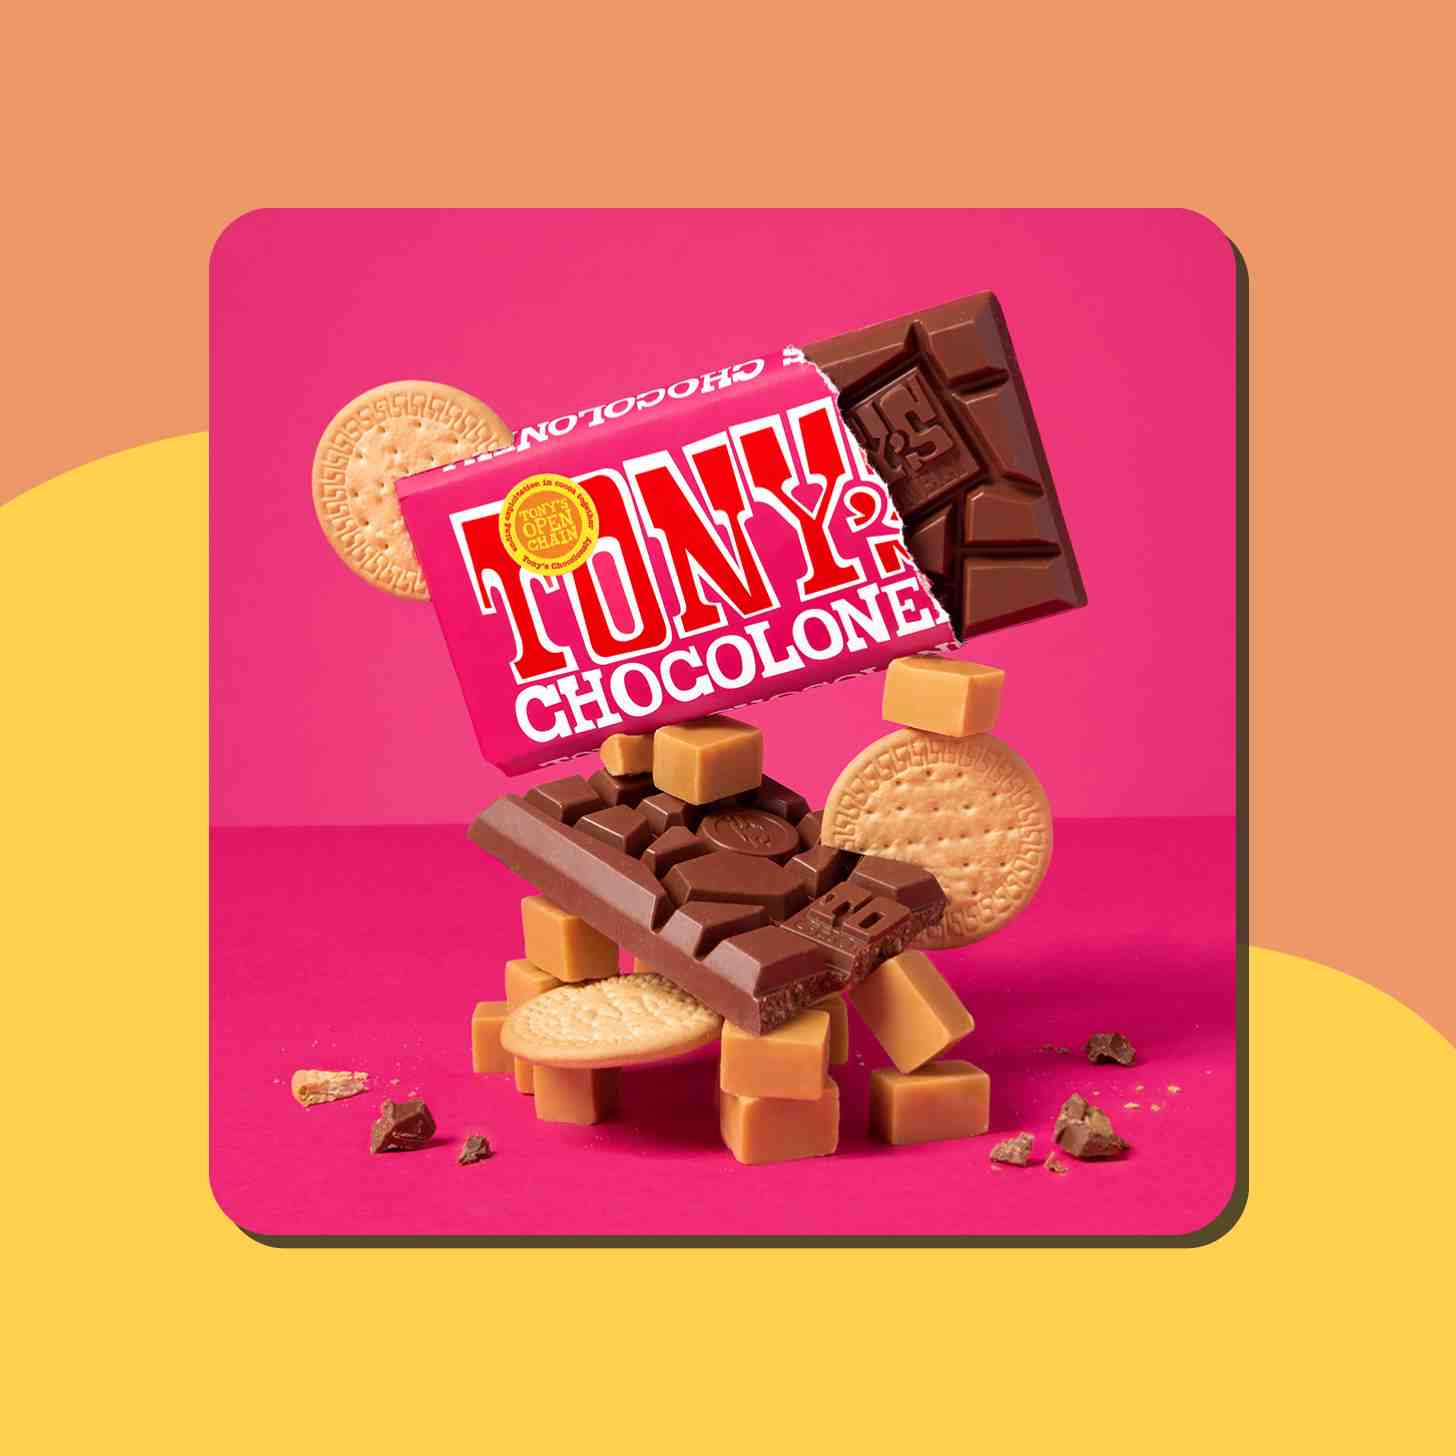 A Box Of Tony's Chocolonely Chocolate Bar Resting On Top Of Some Cookies And A Chocolate Bar